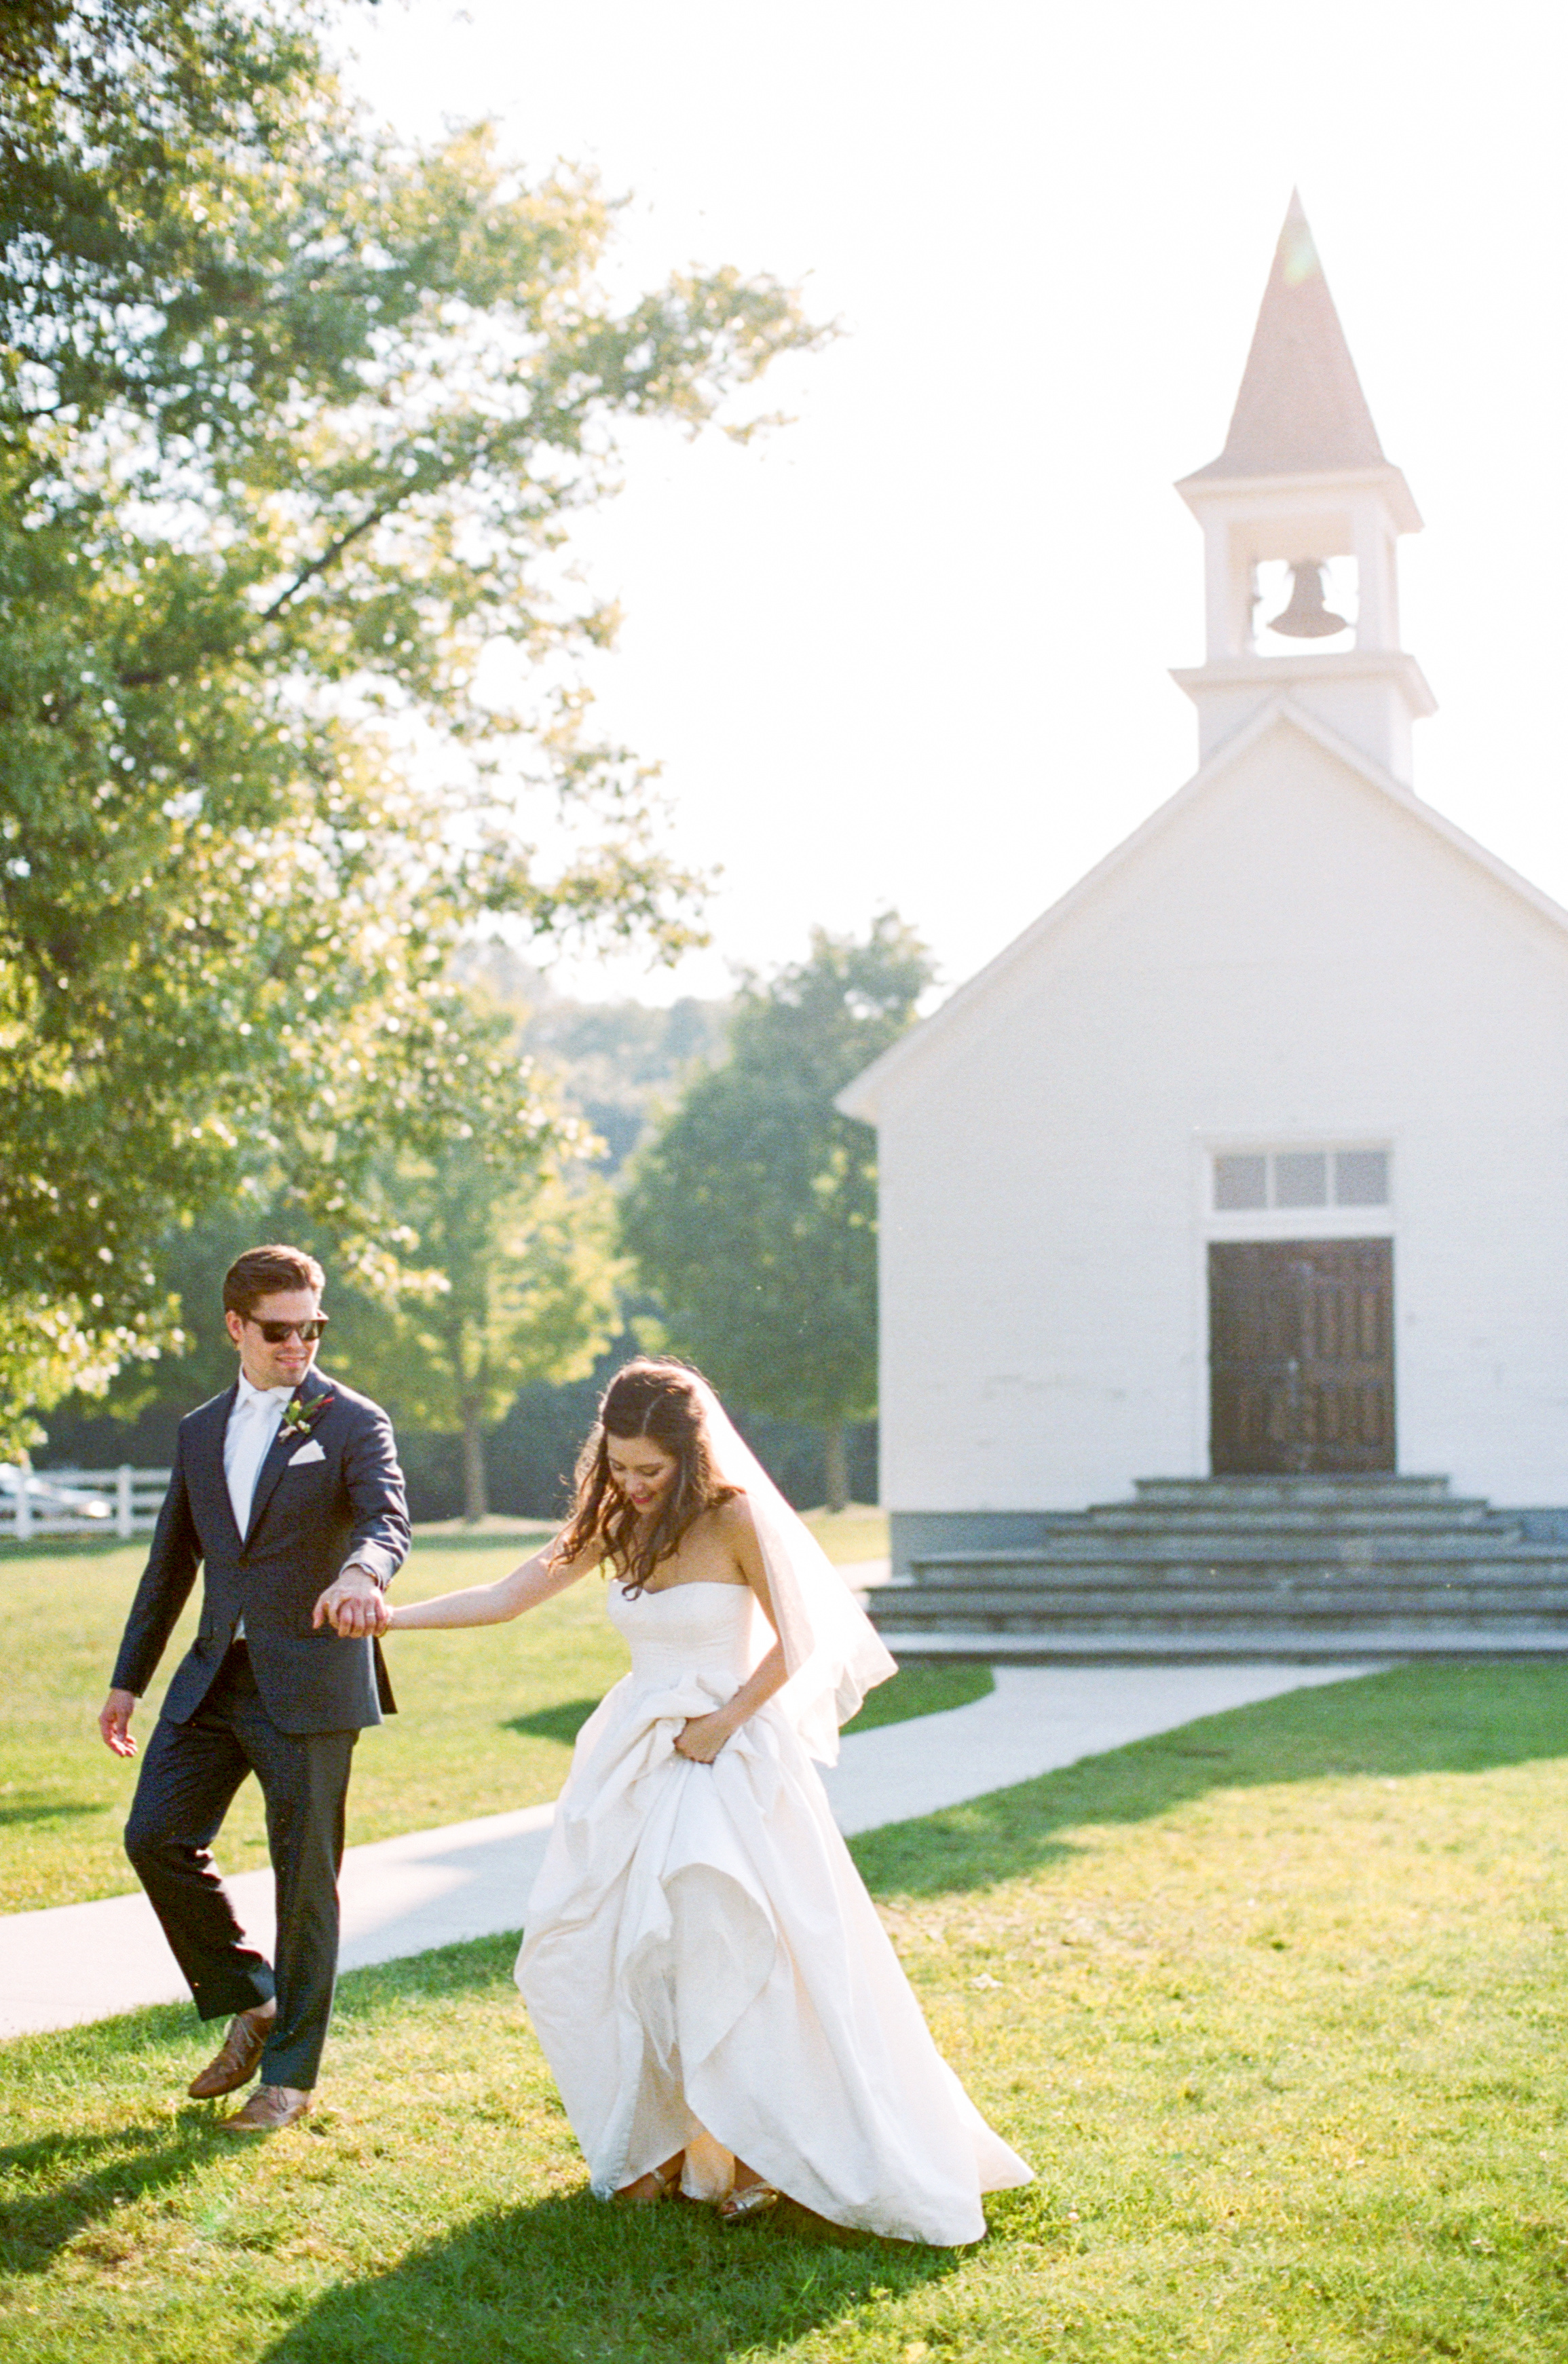 White Chapel Wedding | The Day's Design | Cory Weber Photography